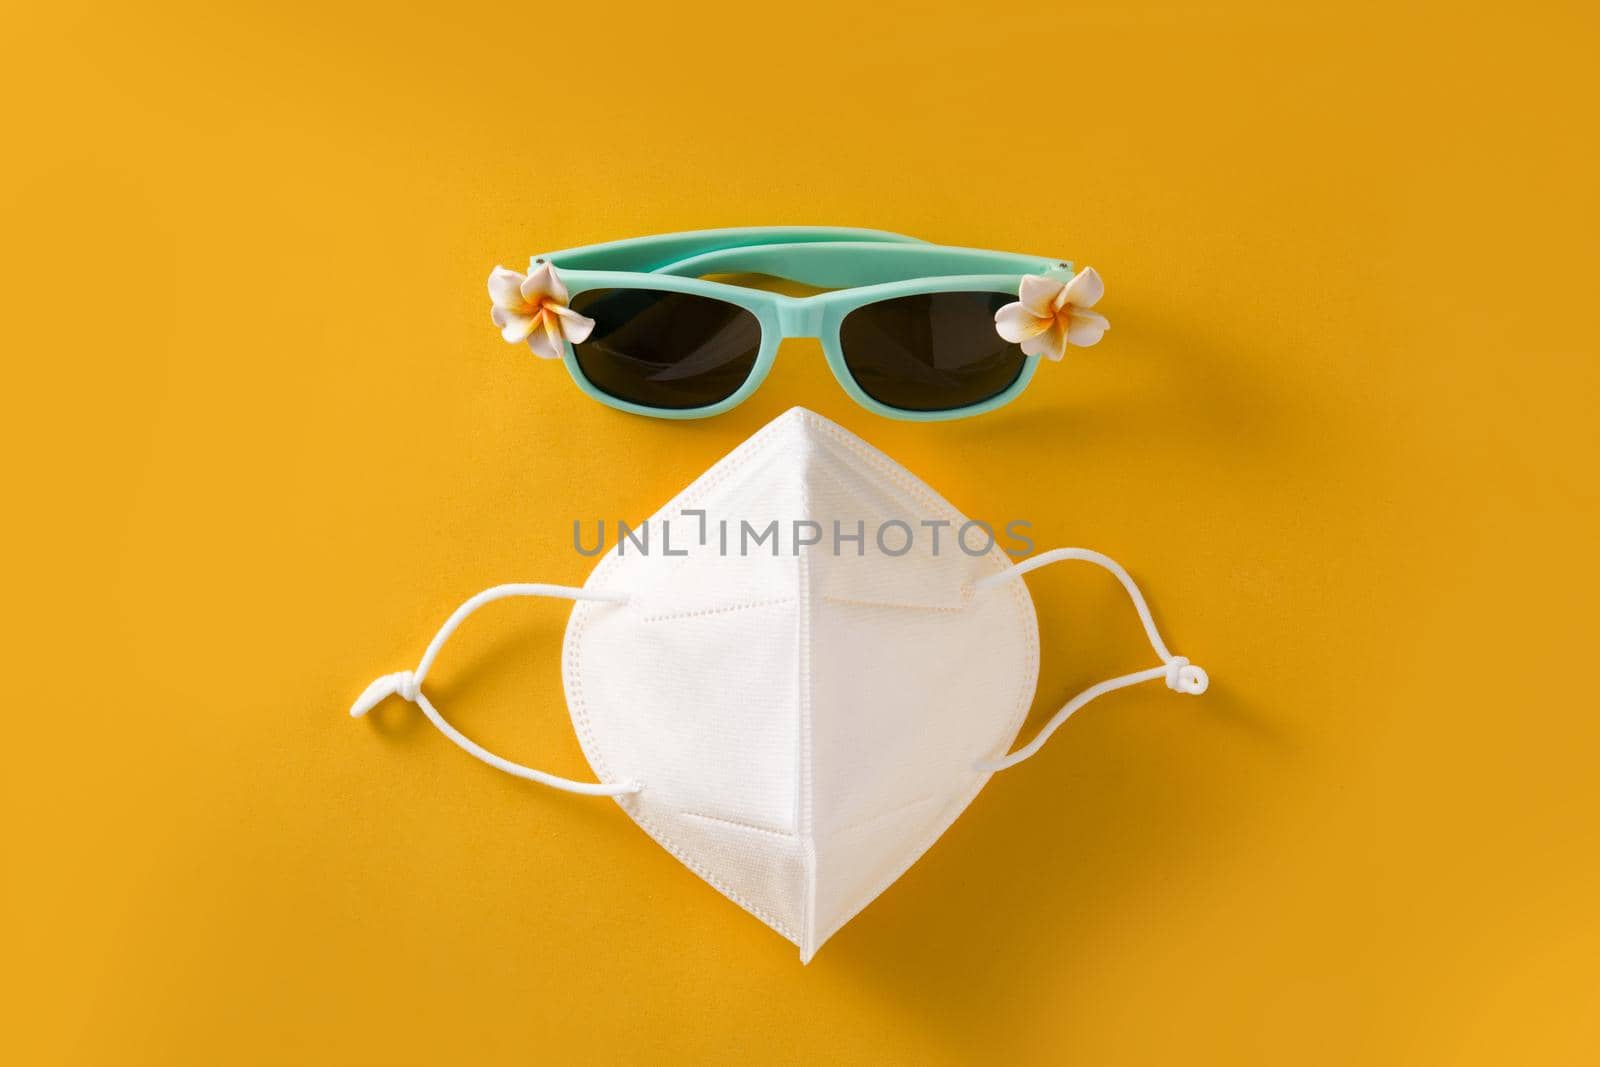 Sunglasses and protective face mask by chandlervid85